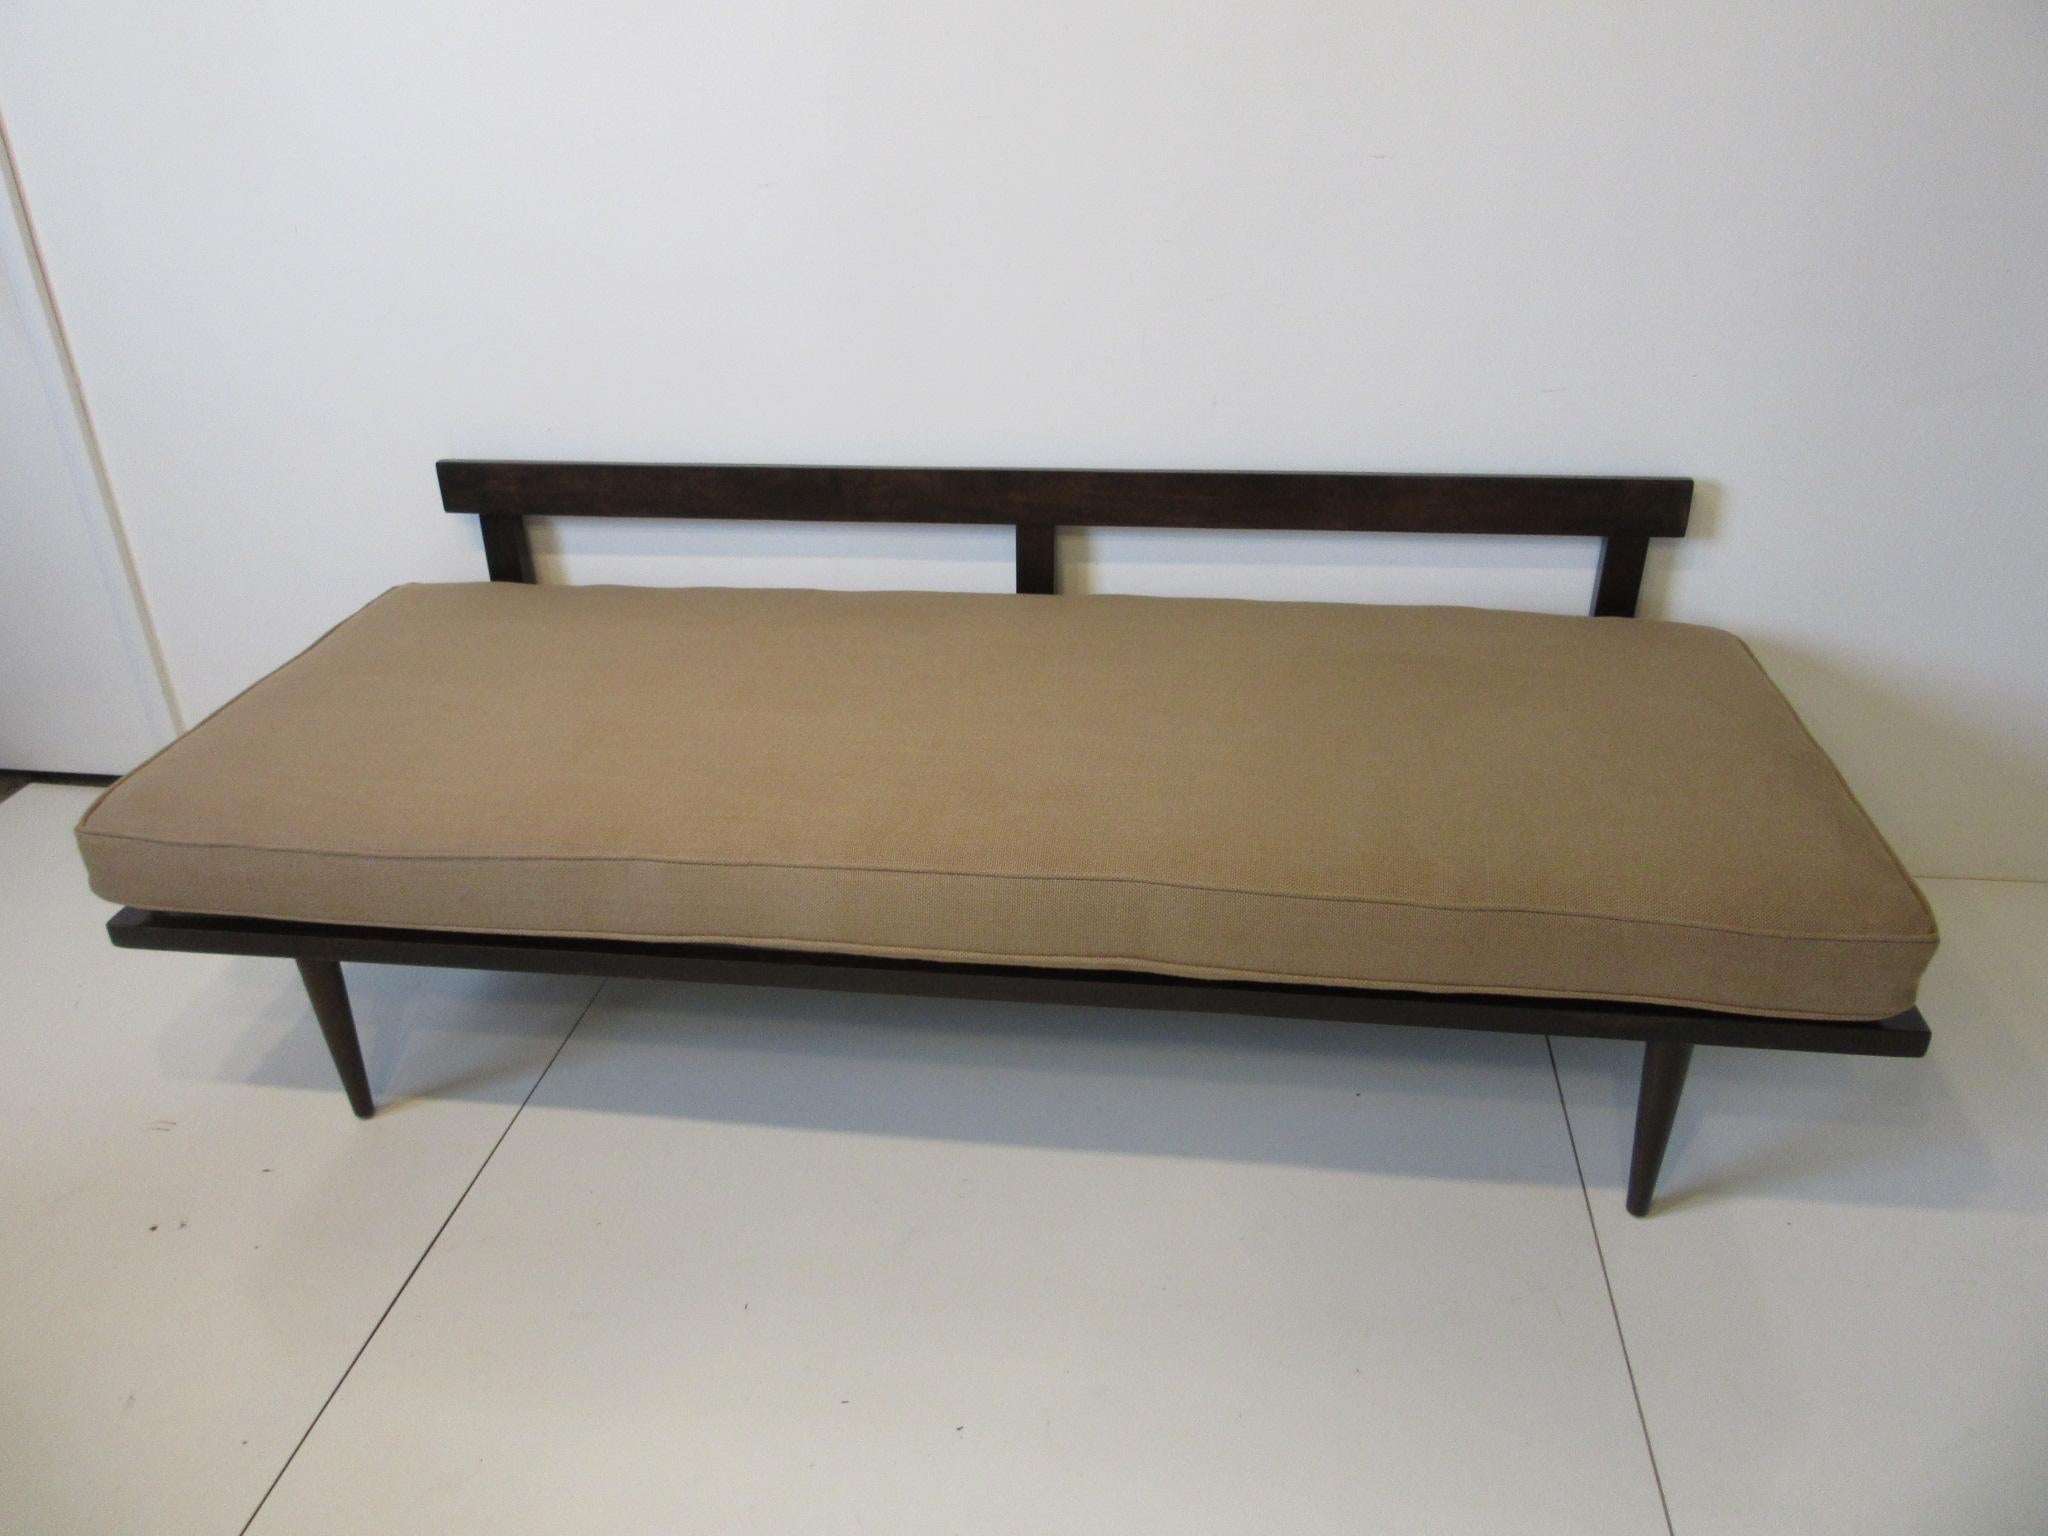 20th Century Midcentury Day Bed / Sofa in the Style of George Nelson